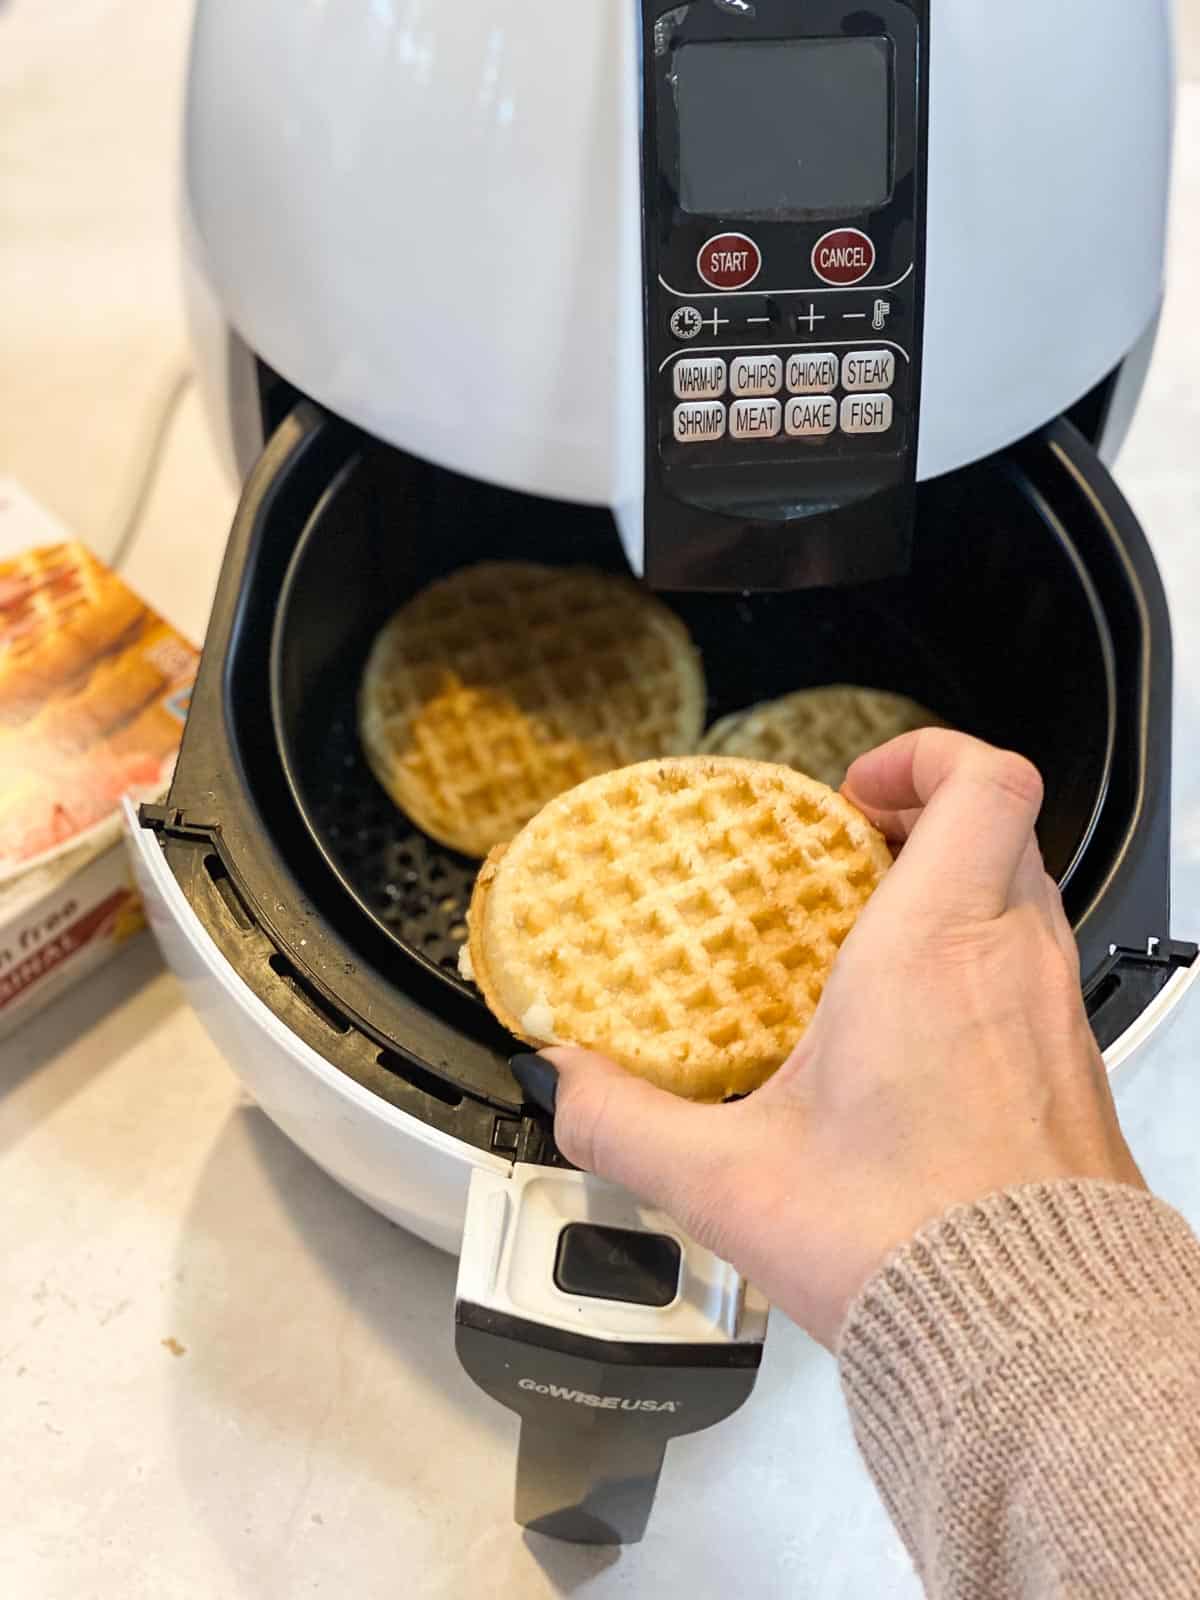 Place frozen waffles in a single layer in the air fryer